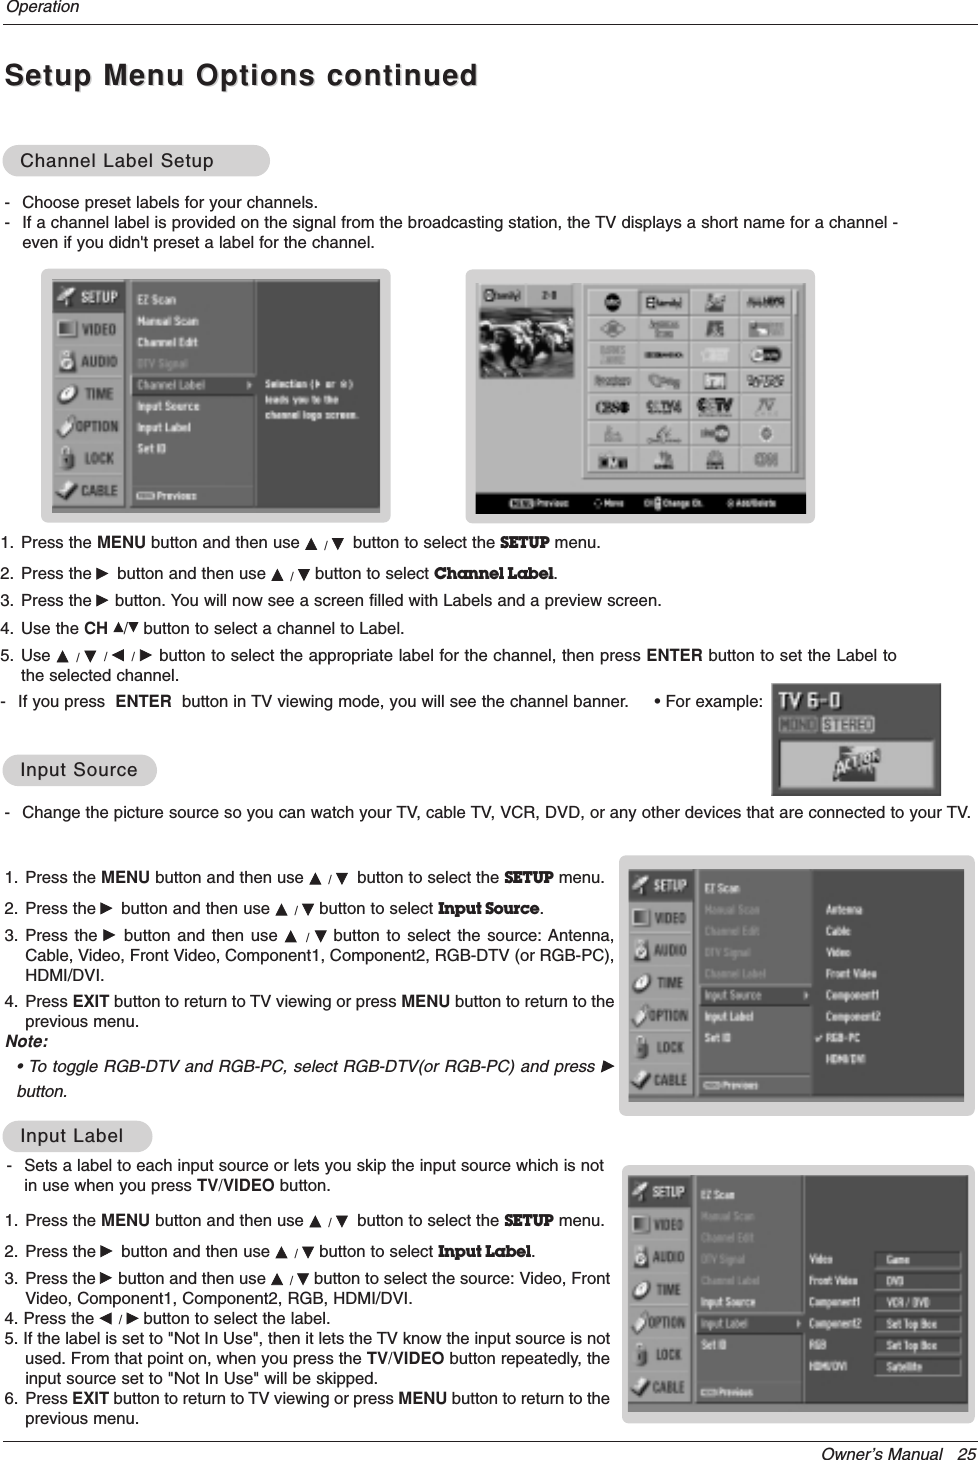 Owner’s Manual   25OperationSetup Menu Options continuedSetup Menu Options continued- Change the picture source so you can watch your TV, cable TV, VCR, DVD, or any other devices that are connected to your TV. 1. Press the MENU button and then use D / Ebutton to select the SETUP menu.2. Press the Gbutton and then use D / Ebutton to select Input Source.3. Press the Gbutton and then use D  /  Ebutton to select the source: Antenna,Cable, Video, Front Video, Component1, Component2, RGB-DTV (or RGB-PC),HDMI/DVI.4. Press EXIT button to return to TV viewing or press MENU button to return to theprevious menu.Note:• To toggle RGB-DTV and RGB-PC, select RGB-DTV(or RGB-PC) and press Gbutton.Input SourceInput Source1. Press the MENU button and then use D / Ebutton to select the SETUP menu.2. Press the Gbutton and then use D / Ebutton to select Input Label.3. Press the Gbutton and then use D / Ebutton to select the source: Video, FrontVideo, Component1, Component2, RGB, HDMI/DVI.4. Press the F / Gbutton to select the label.5. If the label is set to &quot;Not In Use&quot;, then it lets the TV know the input source is notused. From that point on, when you press the TV/VIDEO button repeatedly, theinput source set to &quot;Not In Use&quot; will be skipped.6. Press EXIT button to return to TV viewing or press MENU button to return to theprevious menu.Input LabelInput Label- Choose preset labels for your channels. - If a channel label is provided on the signal from the broadcasting station, the TV displays a short name for a channel -even if you didn&apos;t preset a label for the channel.1. Press the MENU button and then use D / Ebutton to select the SETUP menu.2. Press the Gbutton and then use D / Ebutton to select Channel Label.3. Press the Gbutton. You will now see a screen filled with Labels and a preview screen.4. Use the CH D/Ebutton to select a channel to Label. 5. Use D  / E/ F  / G  button to select the appropriate label for the channel, then press ENTER button to set the Label tothe selected channel.- If you press  ENTER button in TV viewing mode, you will see the channel banner.     • For example:Channel Label SetupChannel Label Setup- Sets a label to each input source or lets you skip the input source which is notin use when you press TV/VIDEO button. 